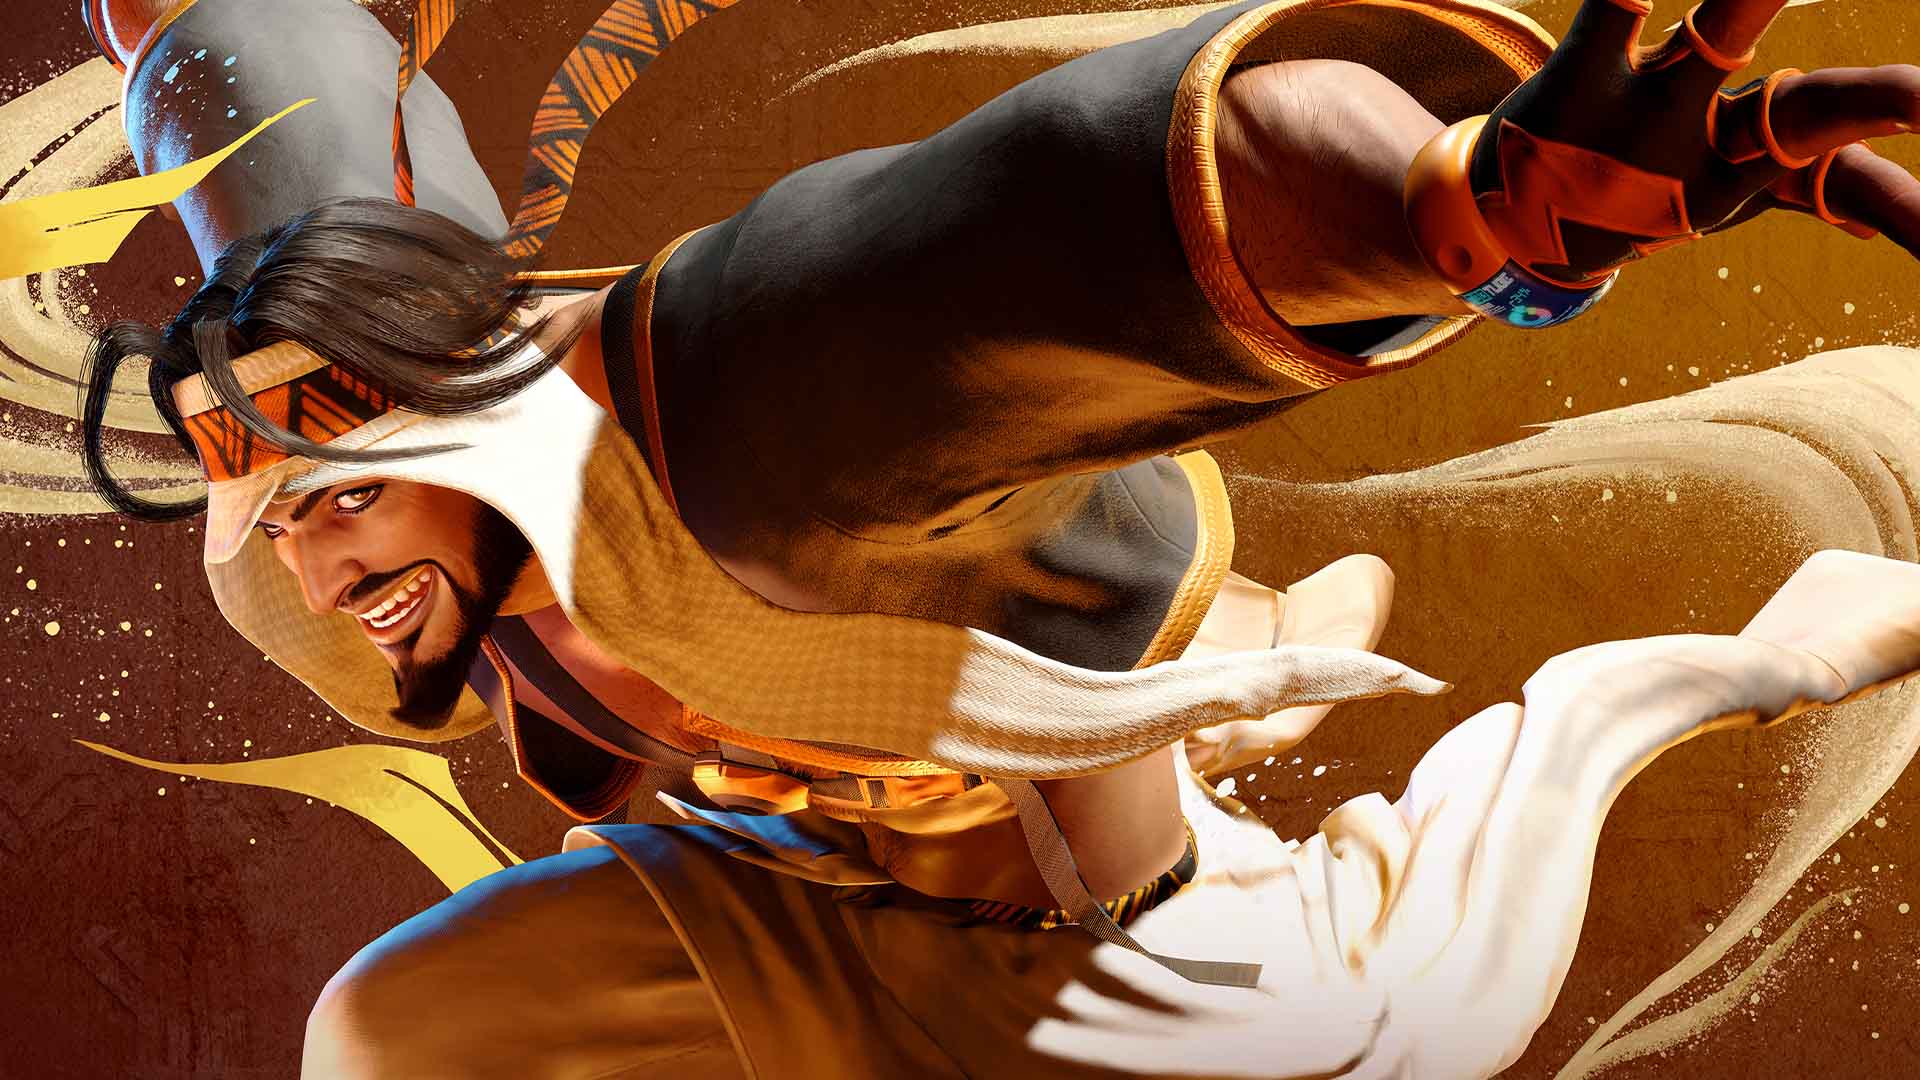 Street Fighter 6 Review (PS5)